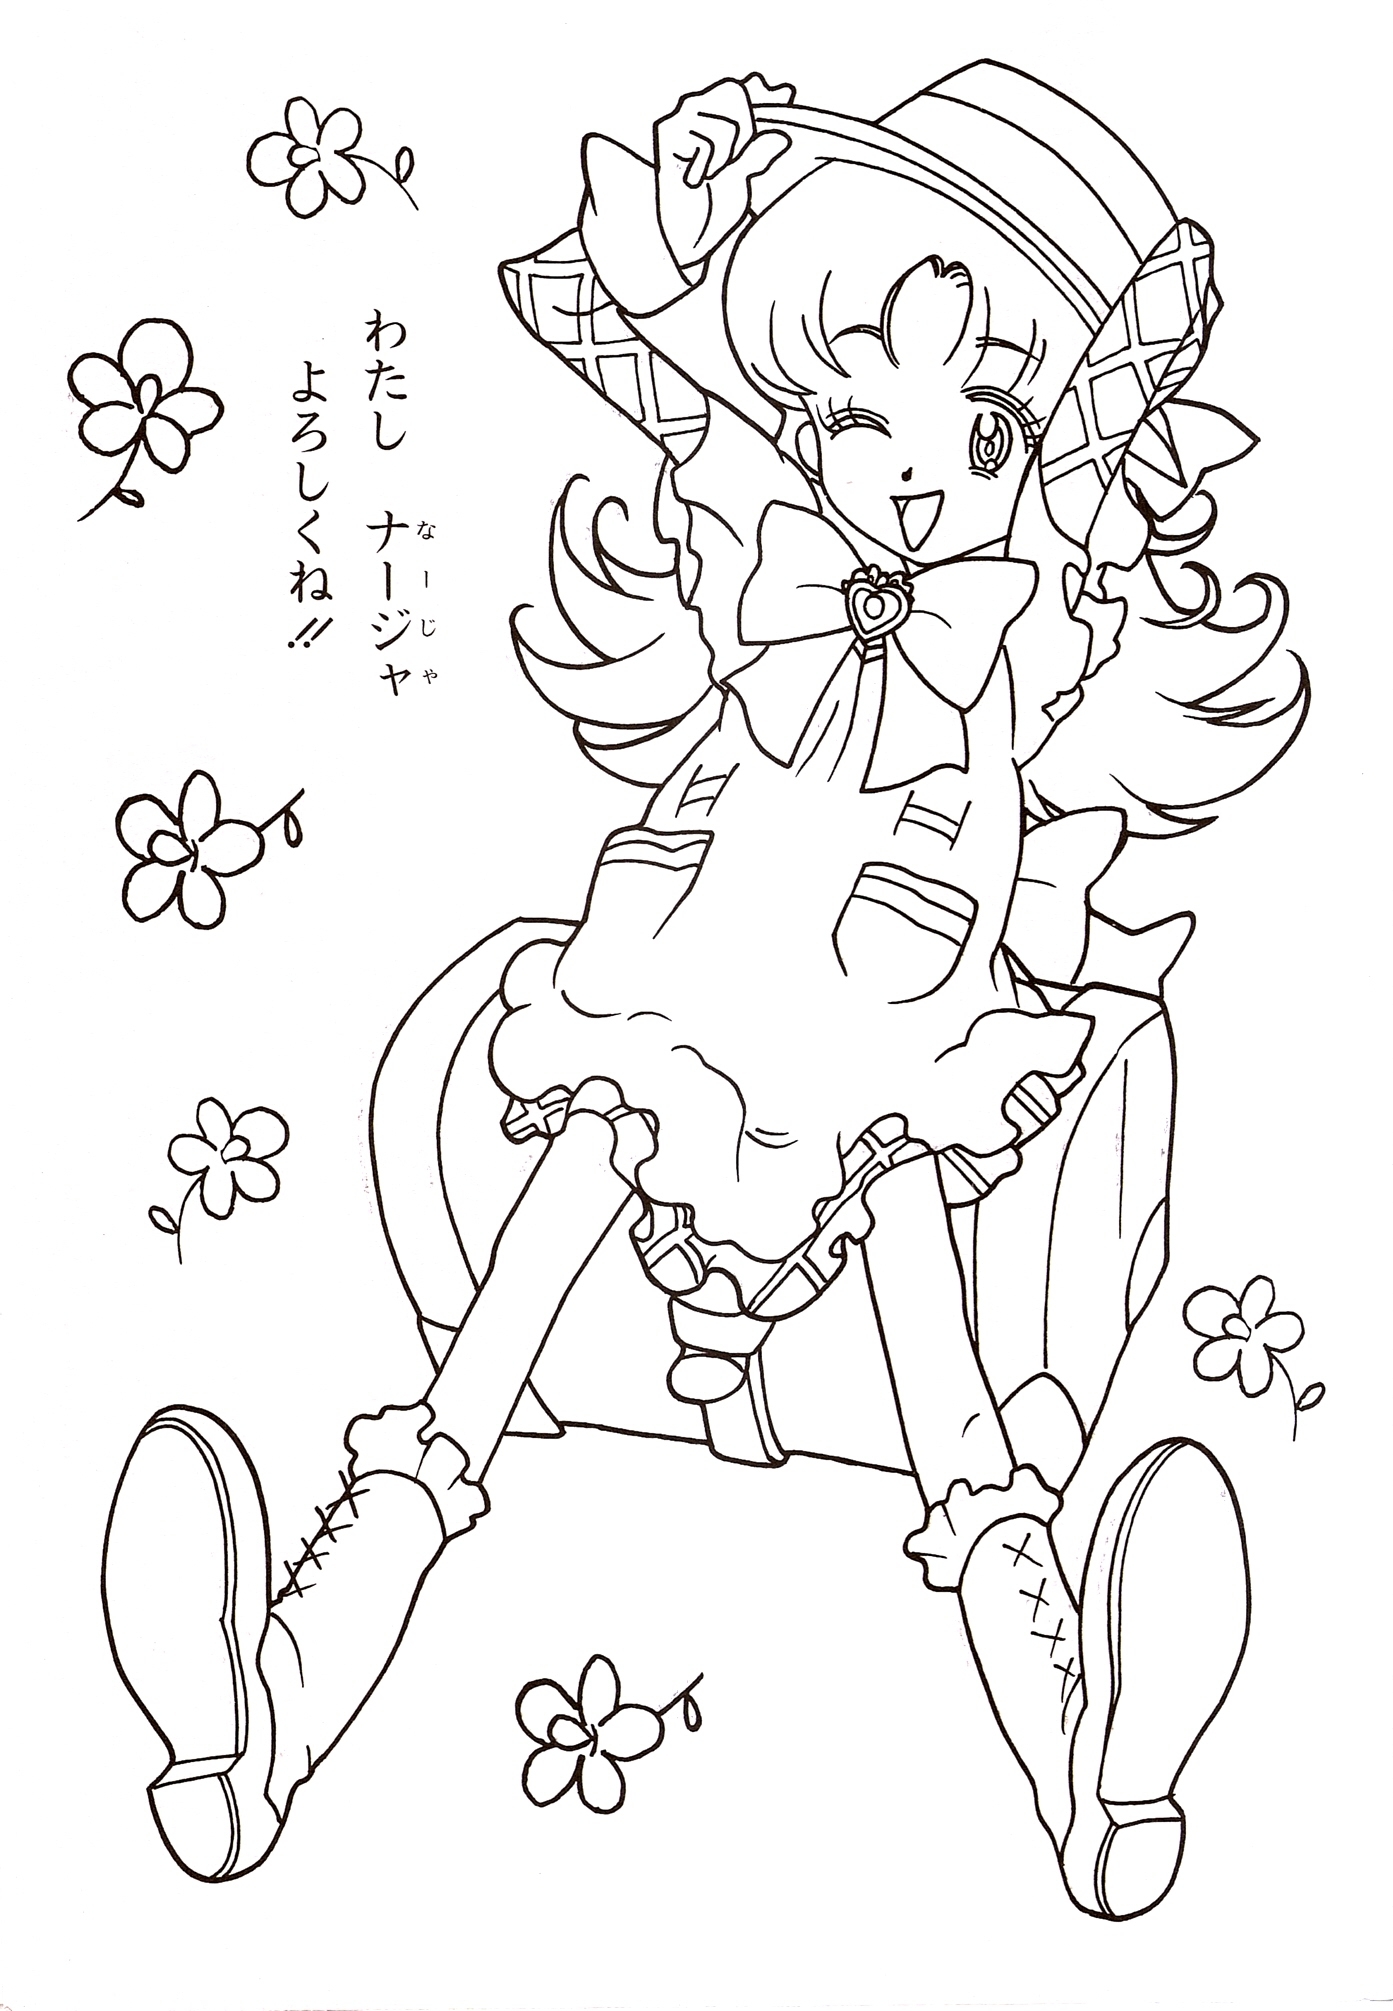 Anime Witch Coloring Pages For Kids Sketch Coloring Page